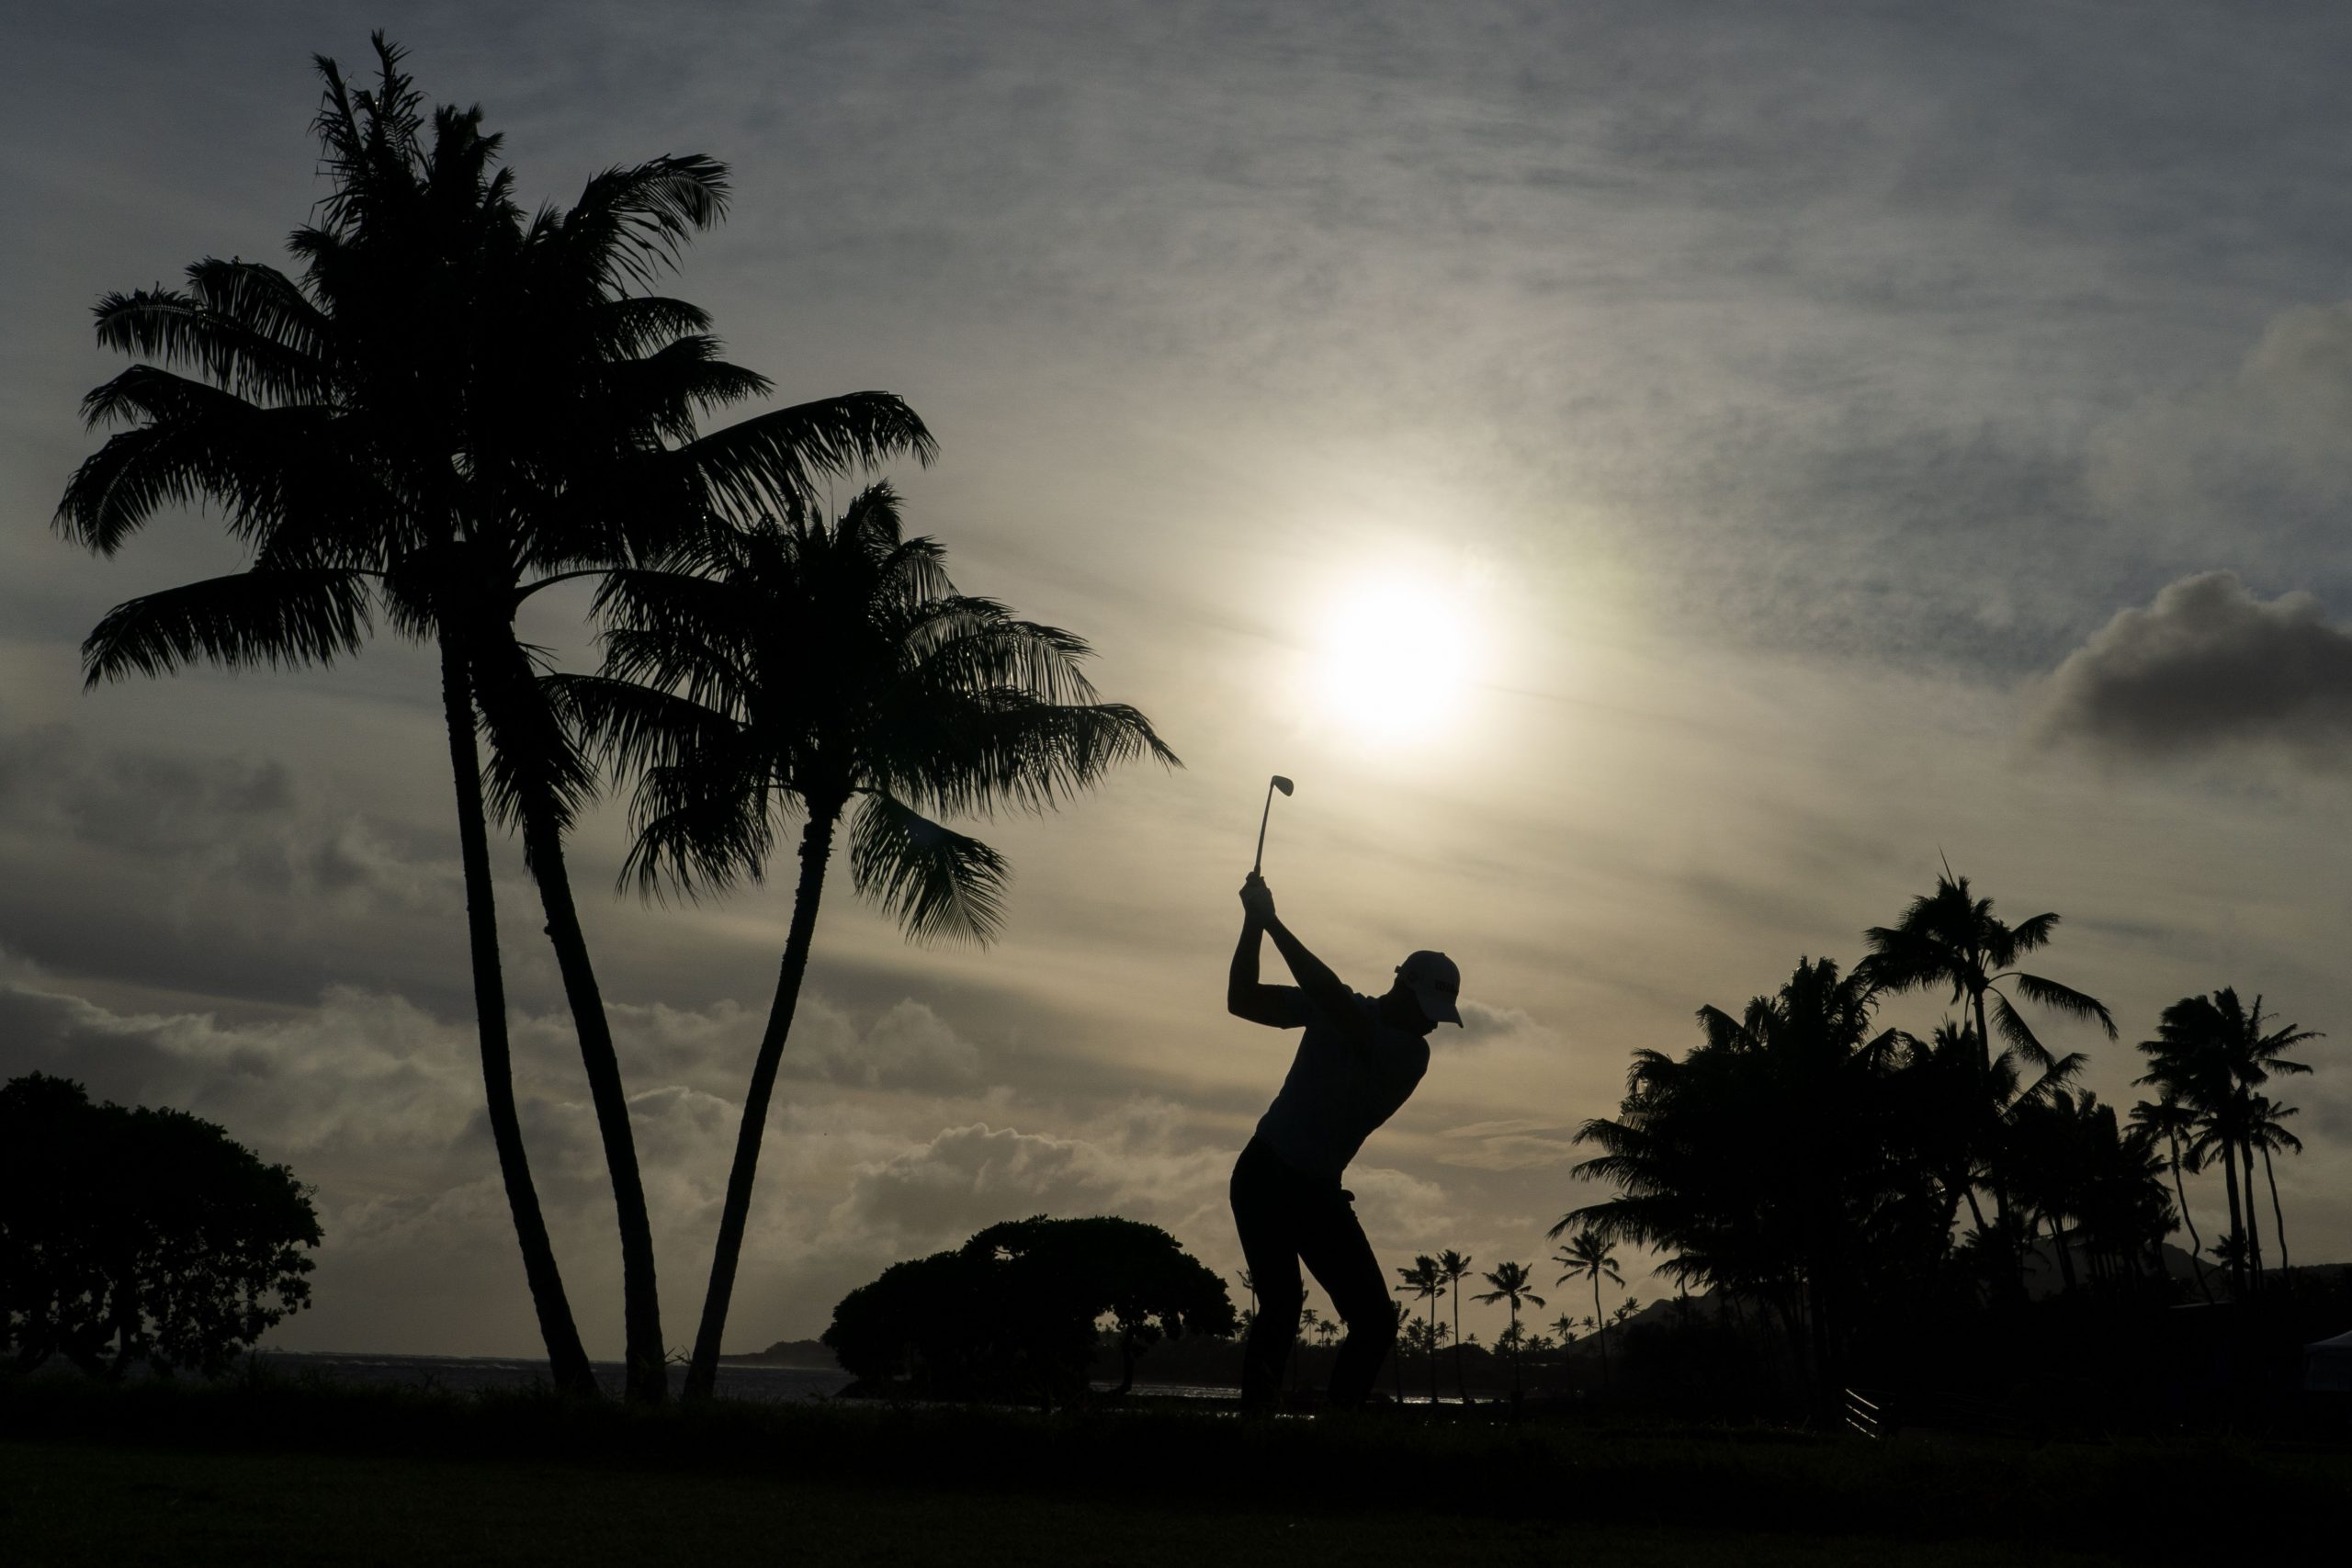 PGA: Sony Open in Hawaii - Second Round